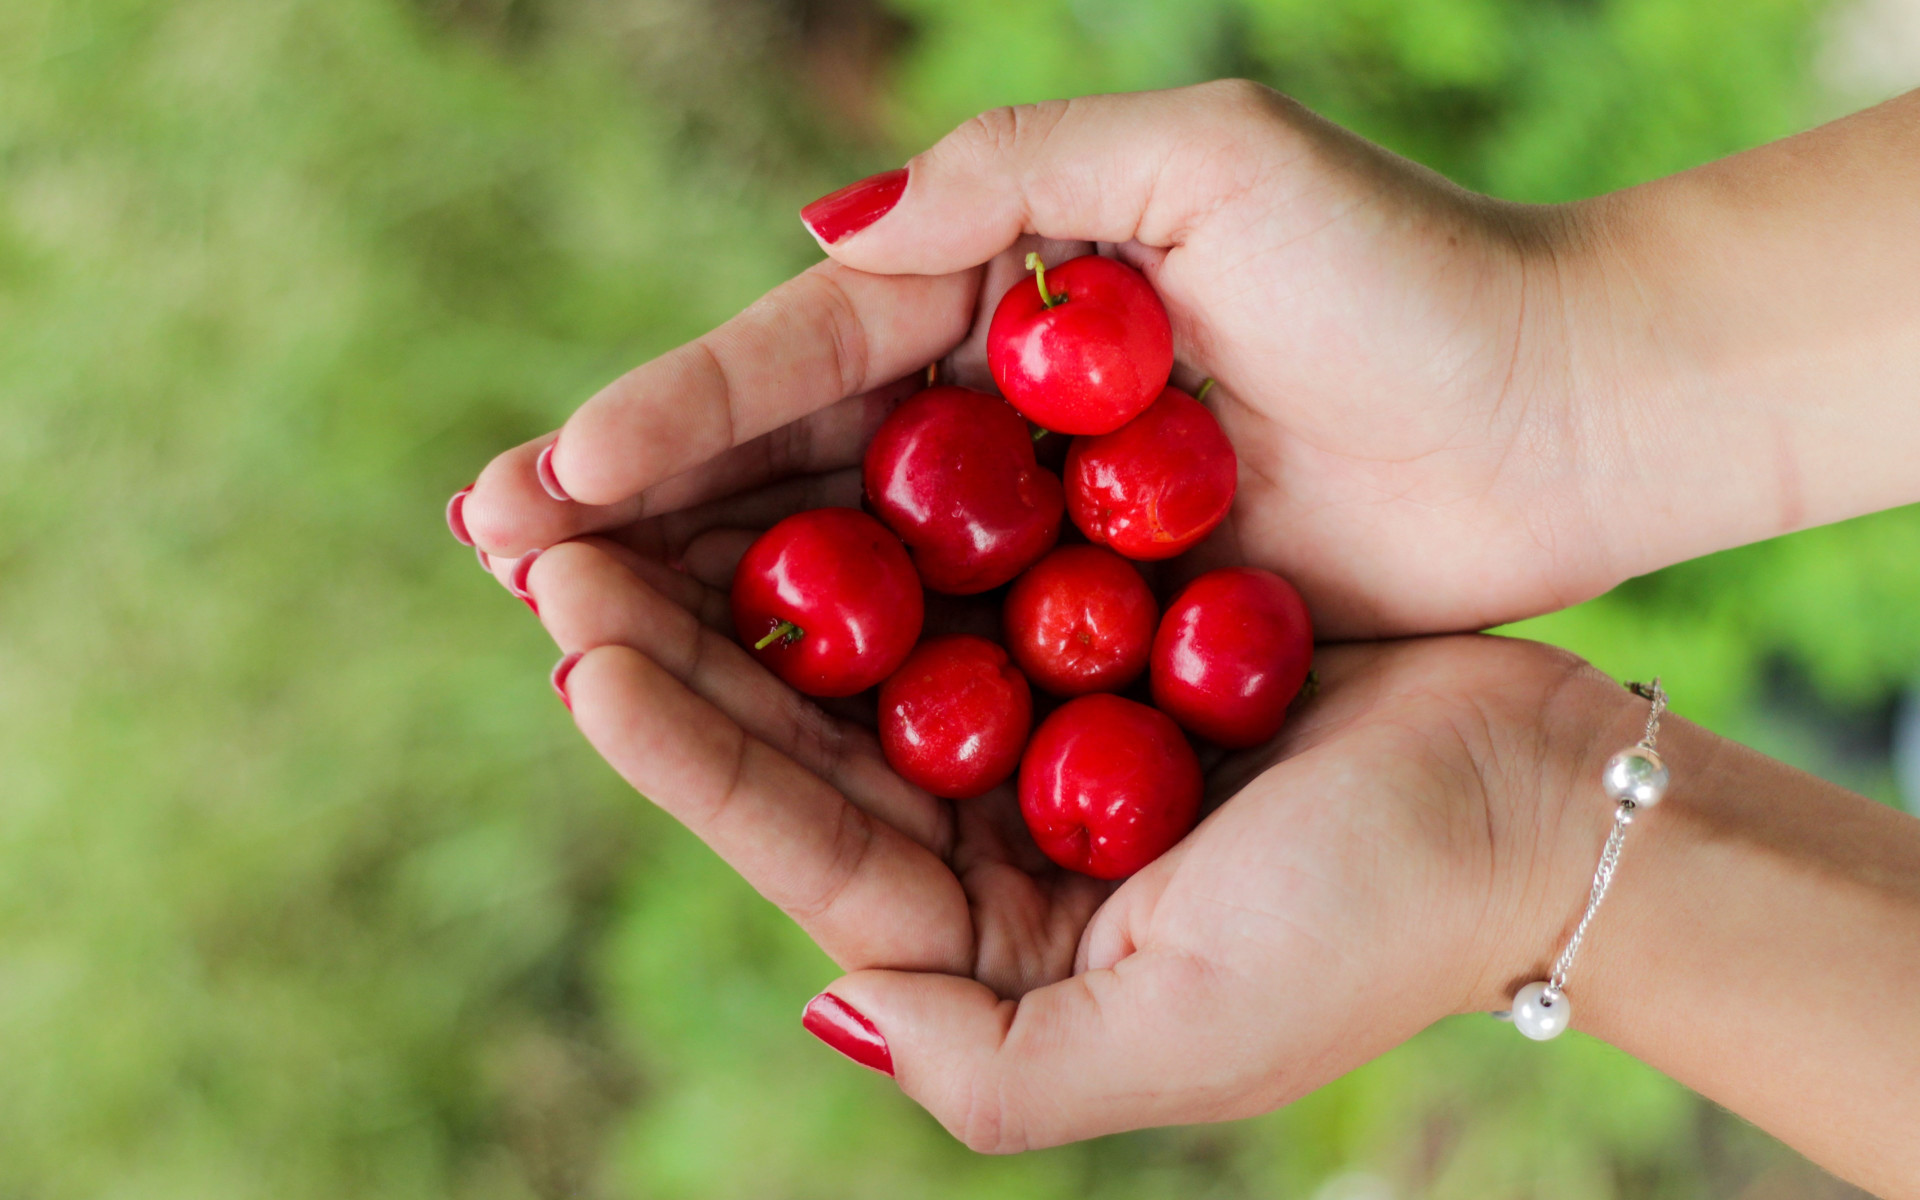 Hands filled with cherries wallpaper 1920x1200